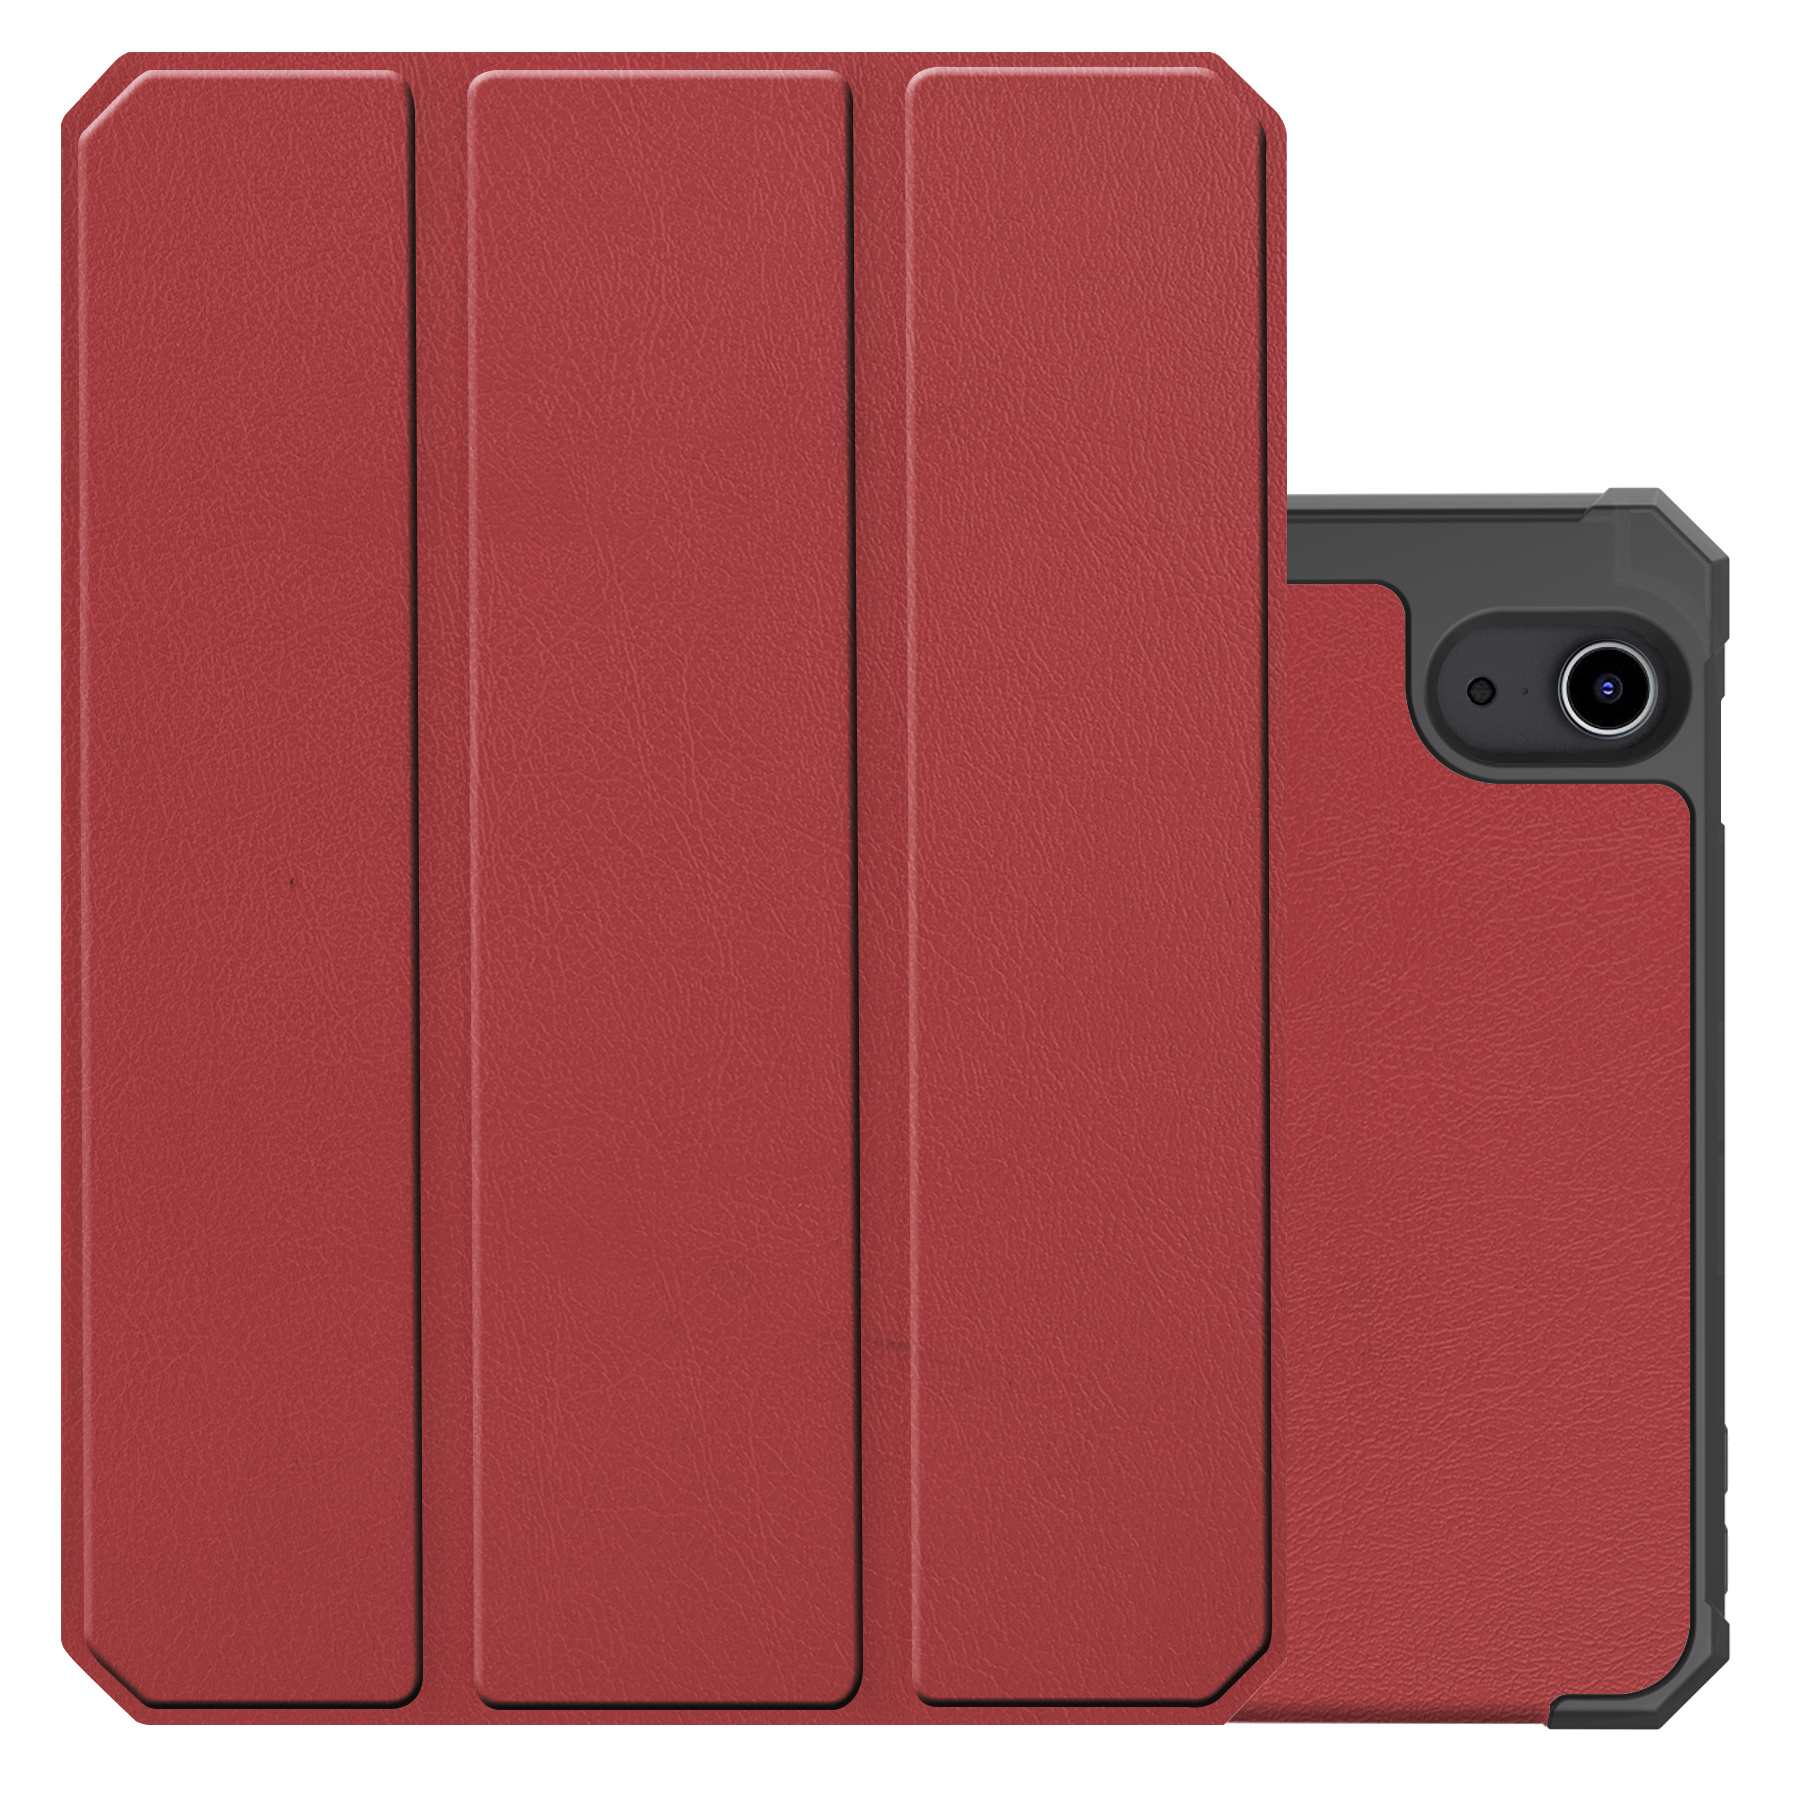 NoXx iPad Mini 6 Hoesje Case Hard Cover Hoes Met Apple Pencil Uitsparing Book Case - Donker Rood